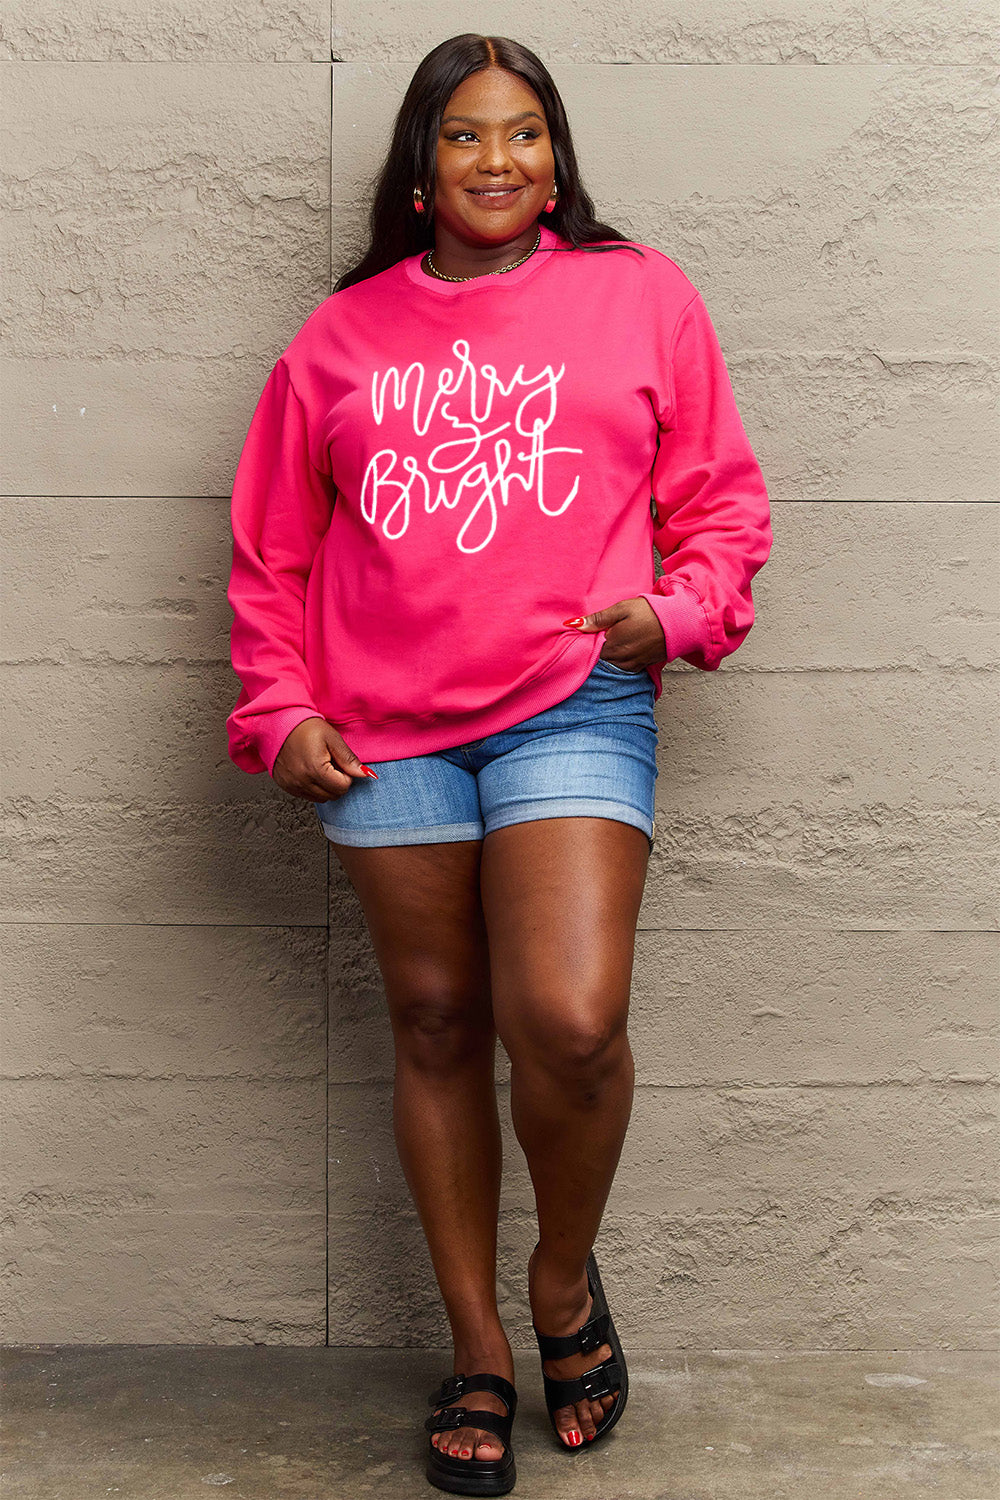 Simply Love Full Size MERRY AND BRIGHT Graphic Sweatshirt (3 Colors)  Krazy Heart Designs Boutique   